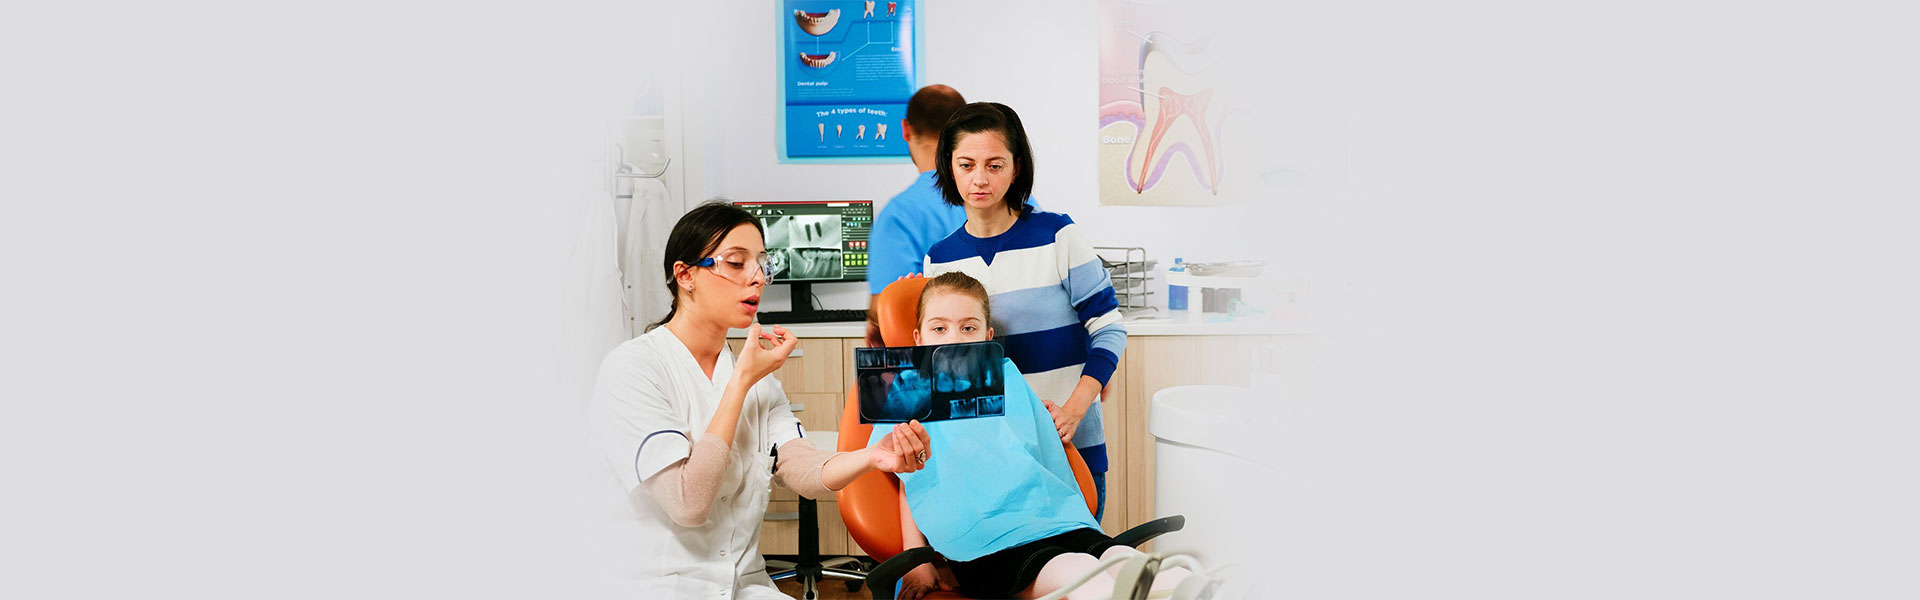 What Are The Benefits Of Seeing A Family Dentist?